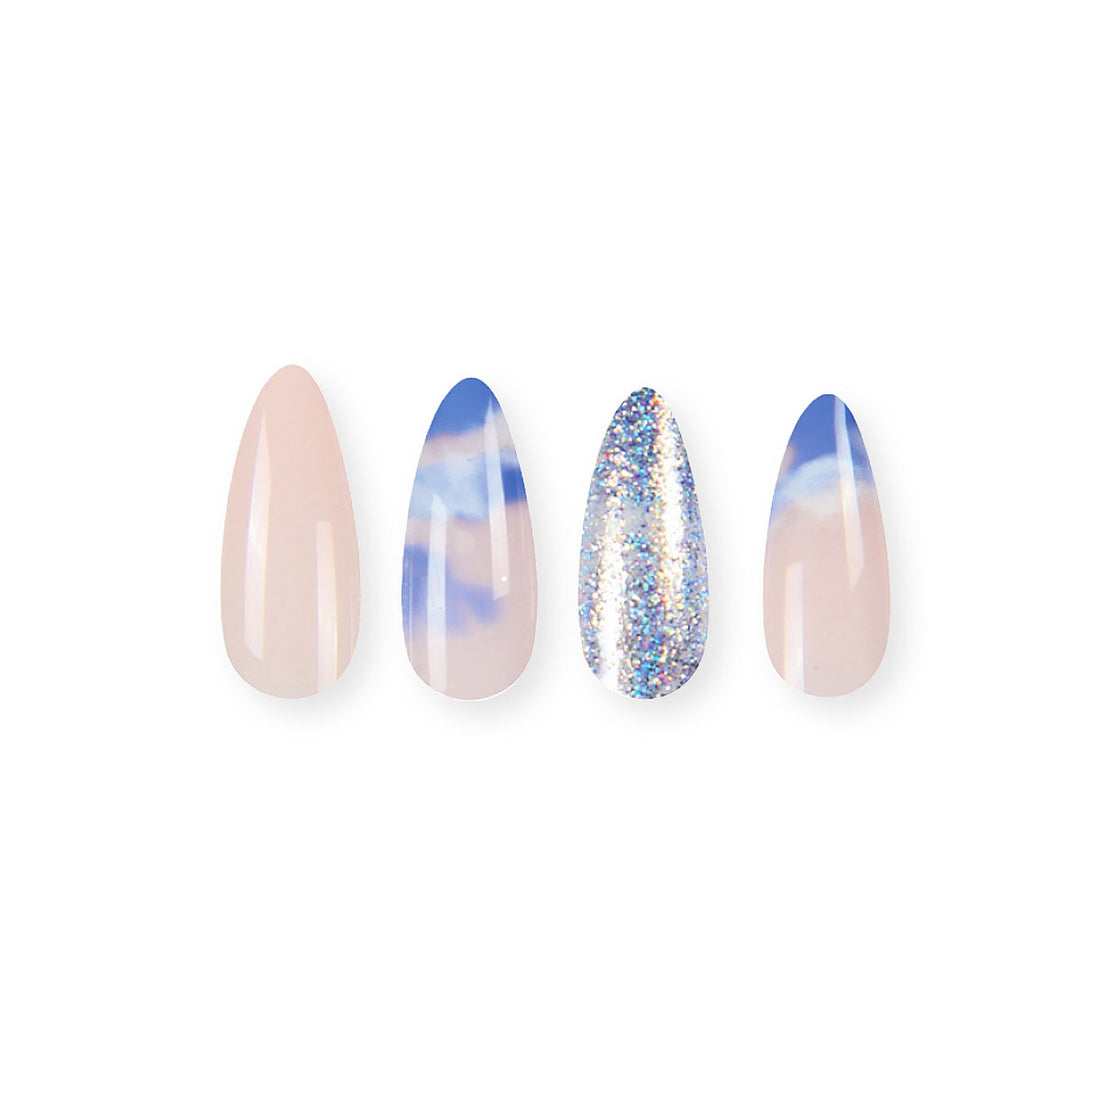 Blue Press On Nails with Glue Almond Shaped Nails - Poshmellow